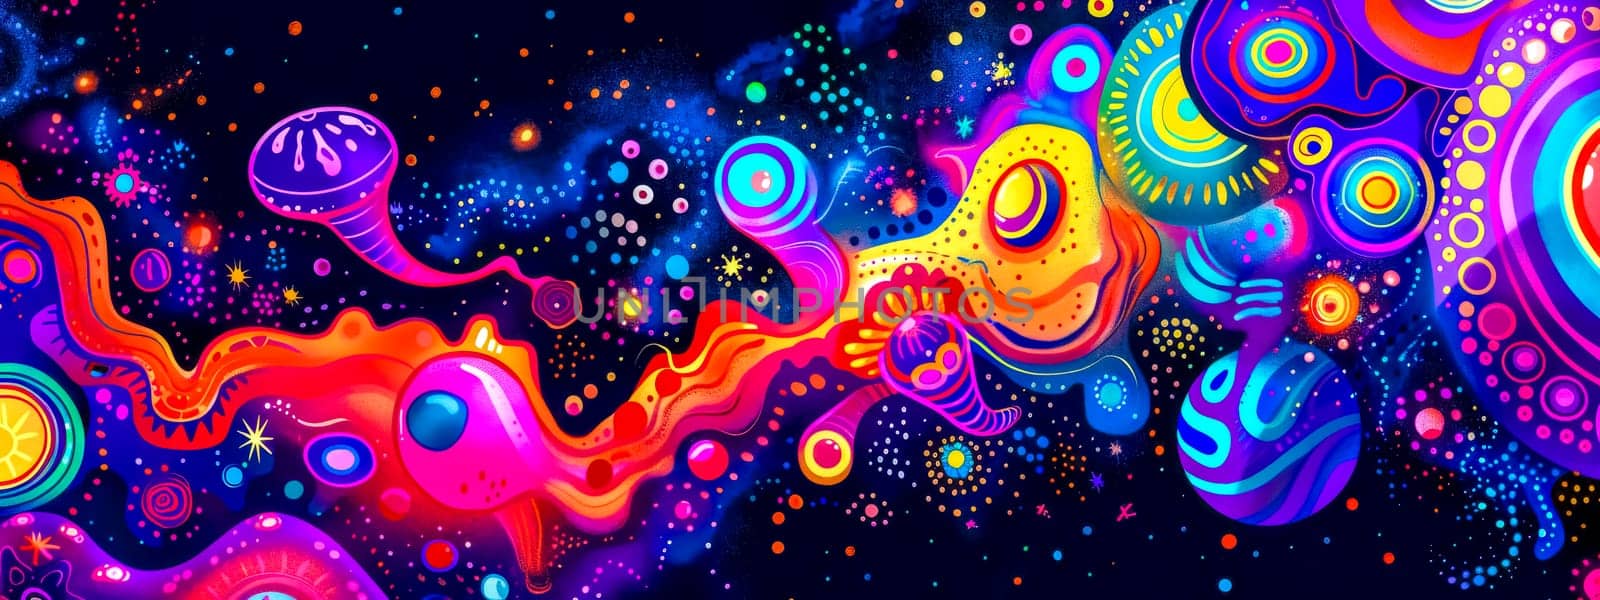 Vibrant and abstract psychedelic space journey illustration with cosmic and fantasy elements. Featuring swirling patterns. Neon colors. And futuristic design